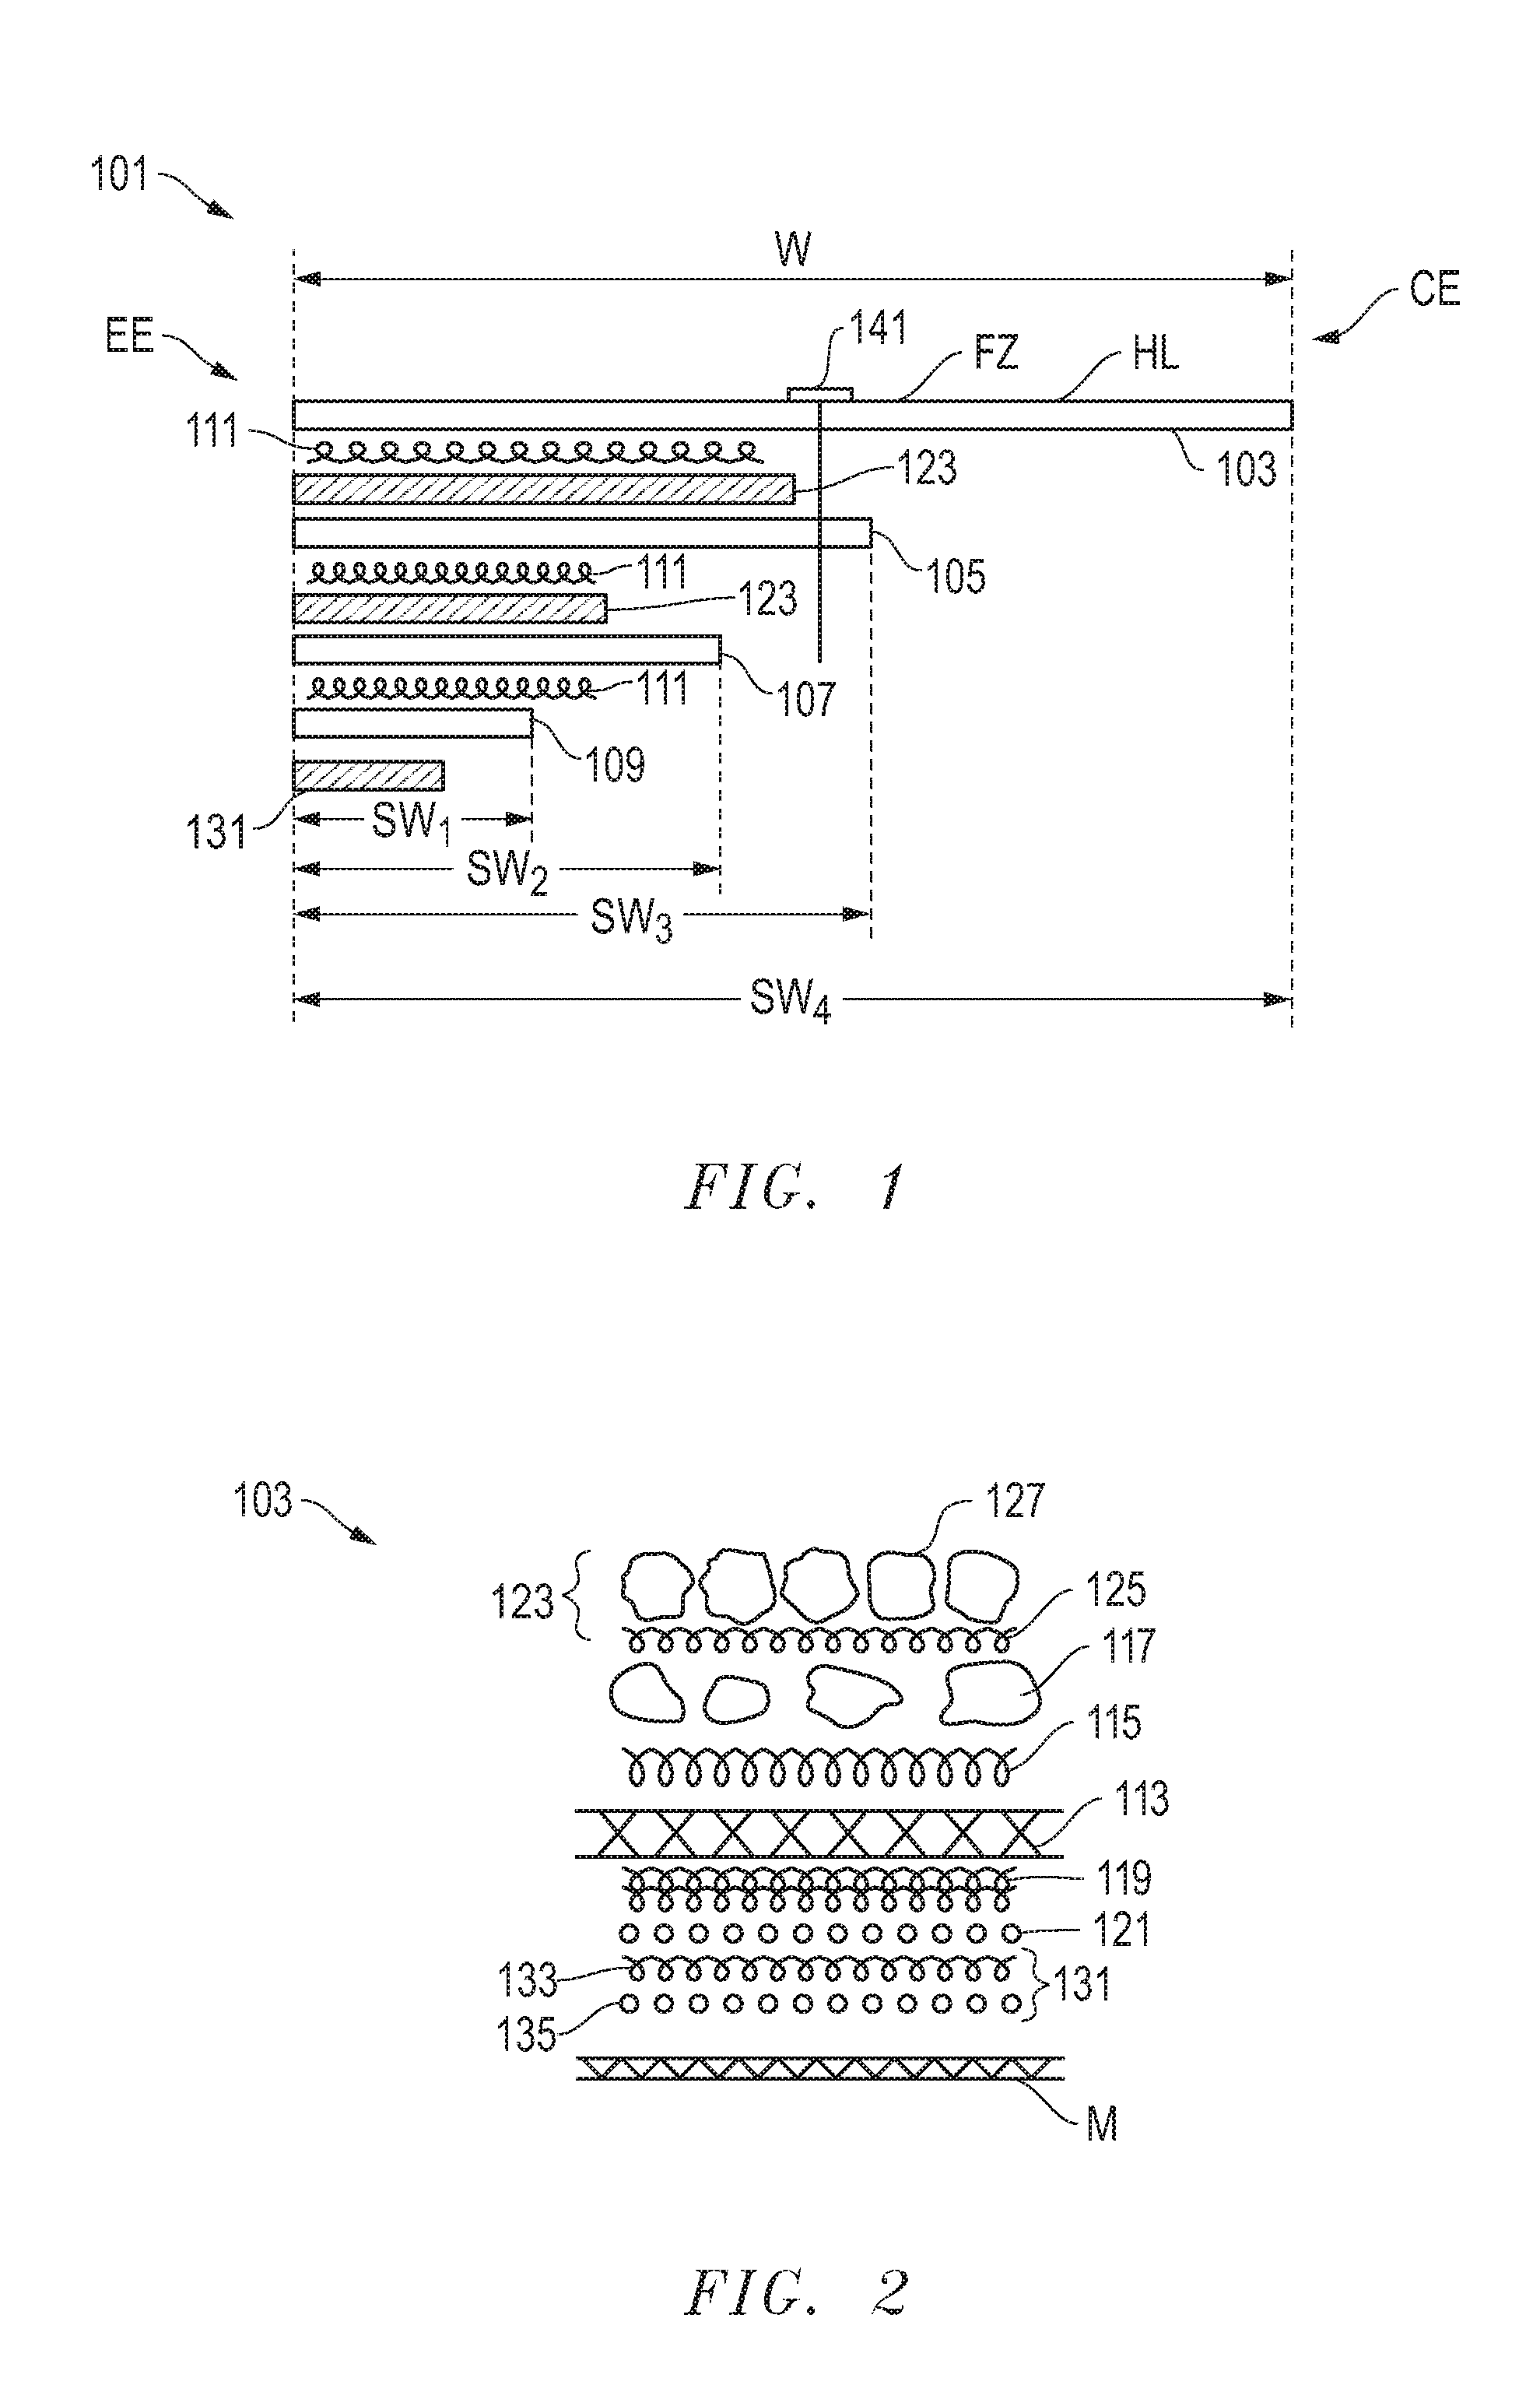 System, method and apparatus for wedge-shaped, multi-layer asphalt roofing